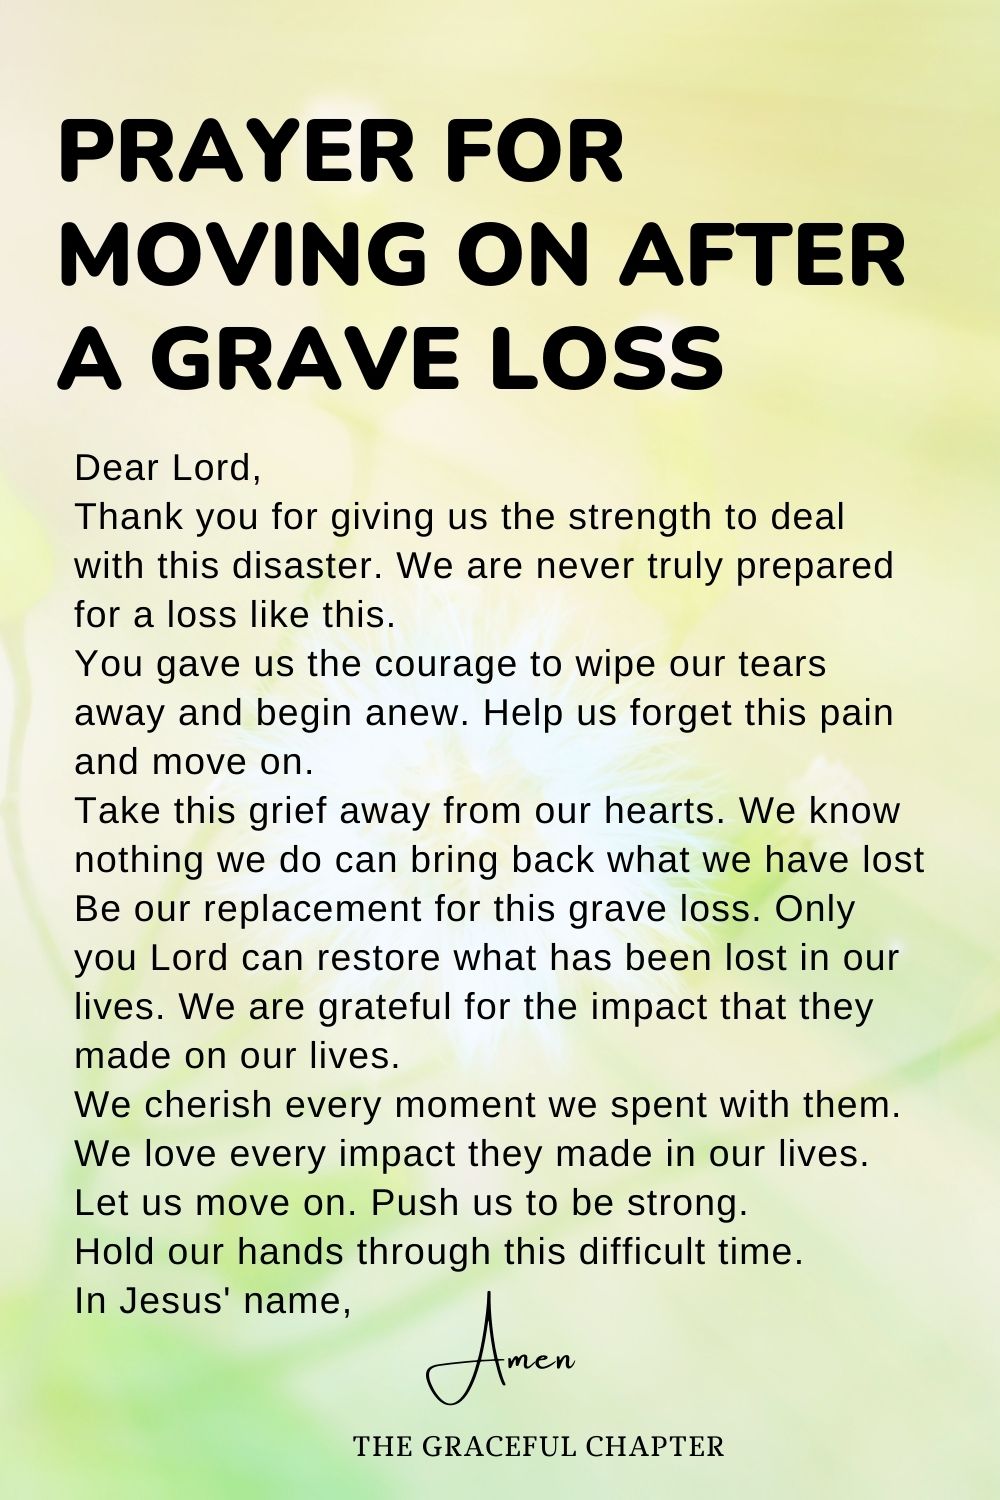 Prayer for moving on after a grave loss